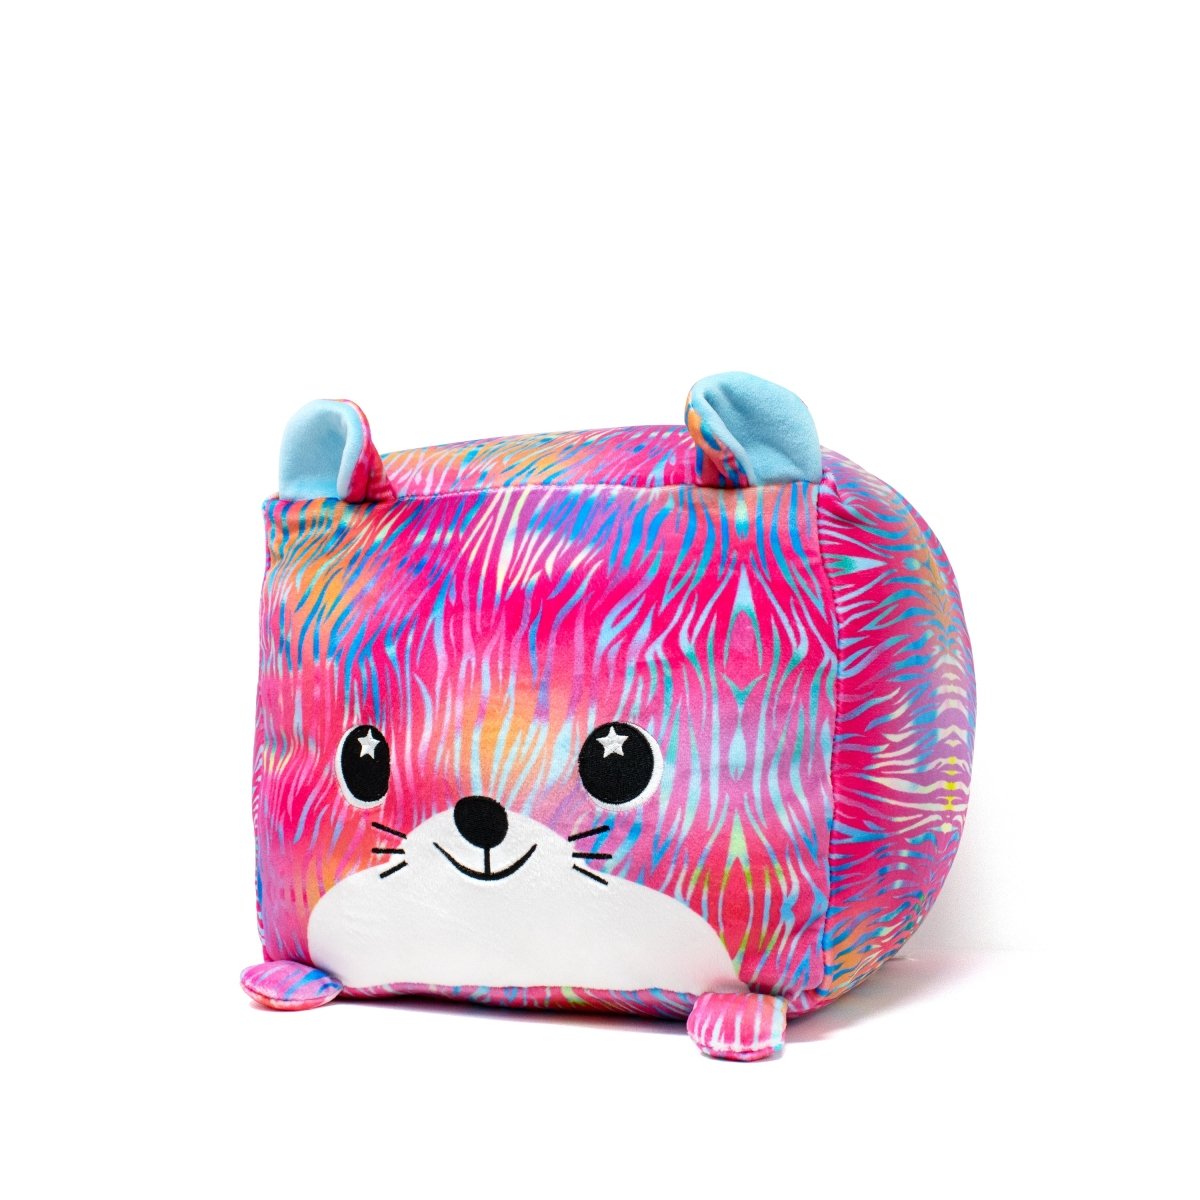 Diego the Tiger plush toy with vibrant rainbow fur and mischievous grin from Moosh-Moosh SQUARED² Collection.